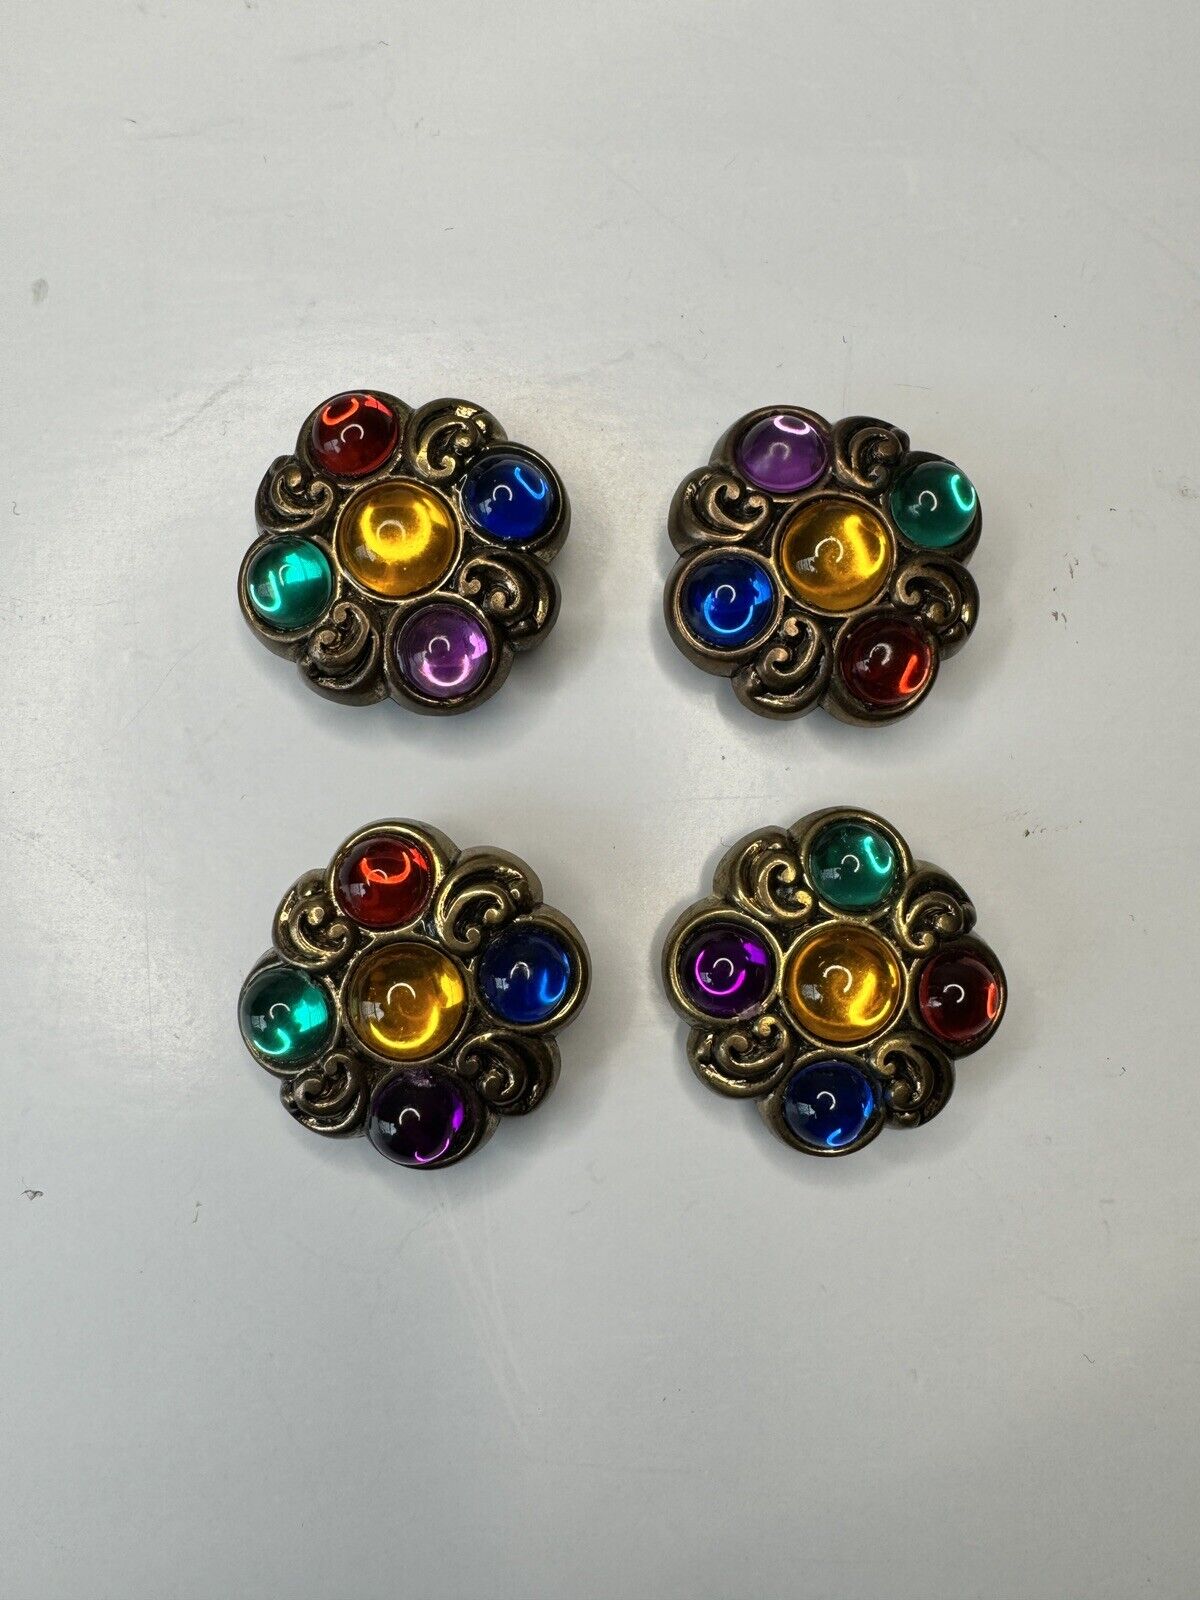 VTG Gold Tone Multicolor Cabochons Button Covers Swirls Lot of 4